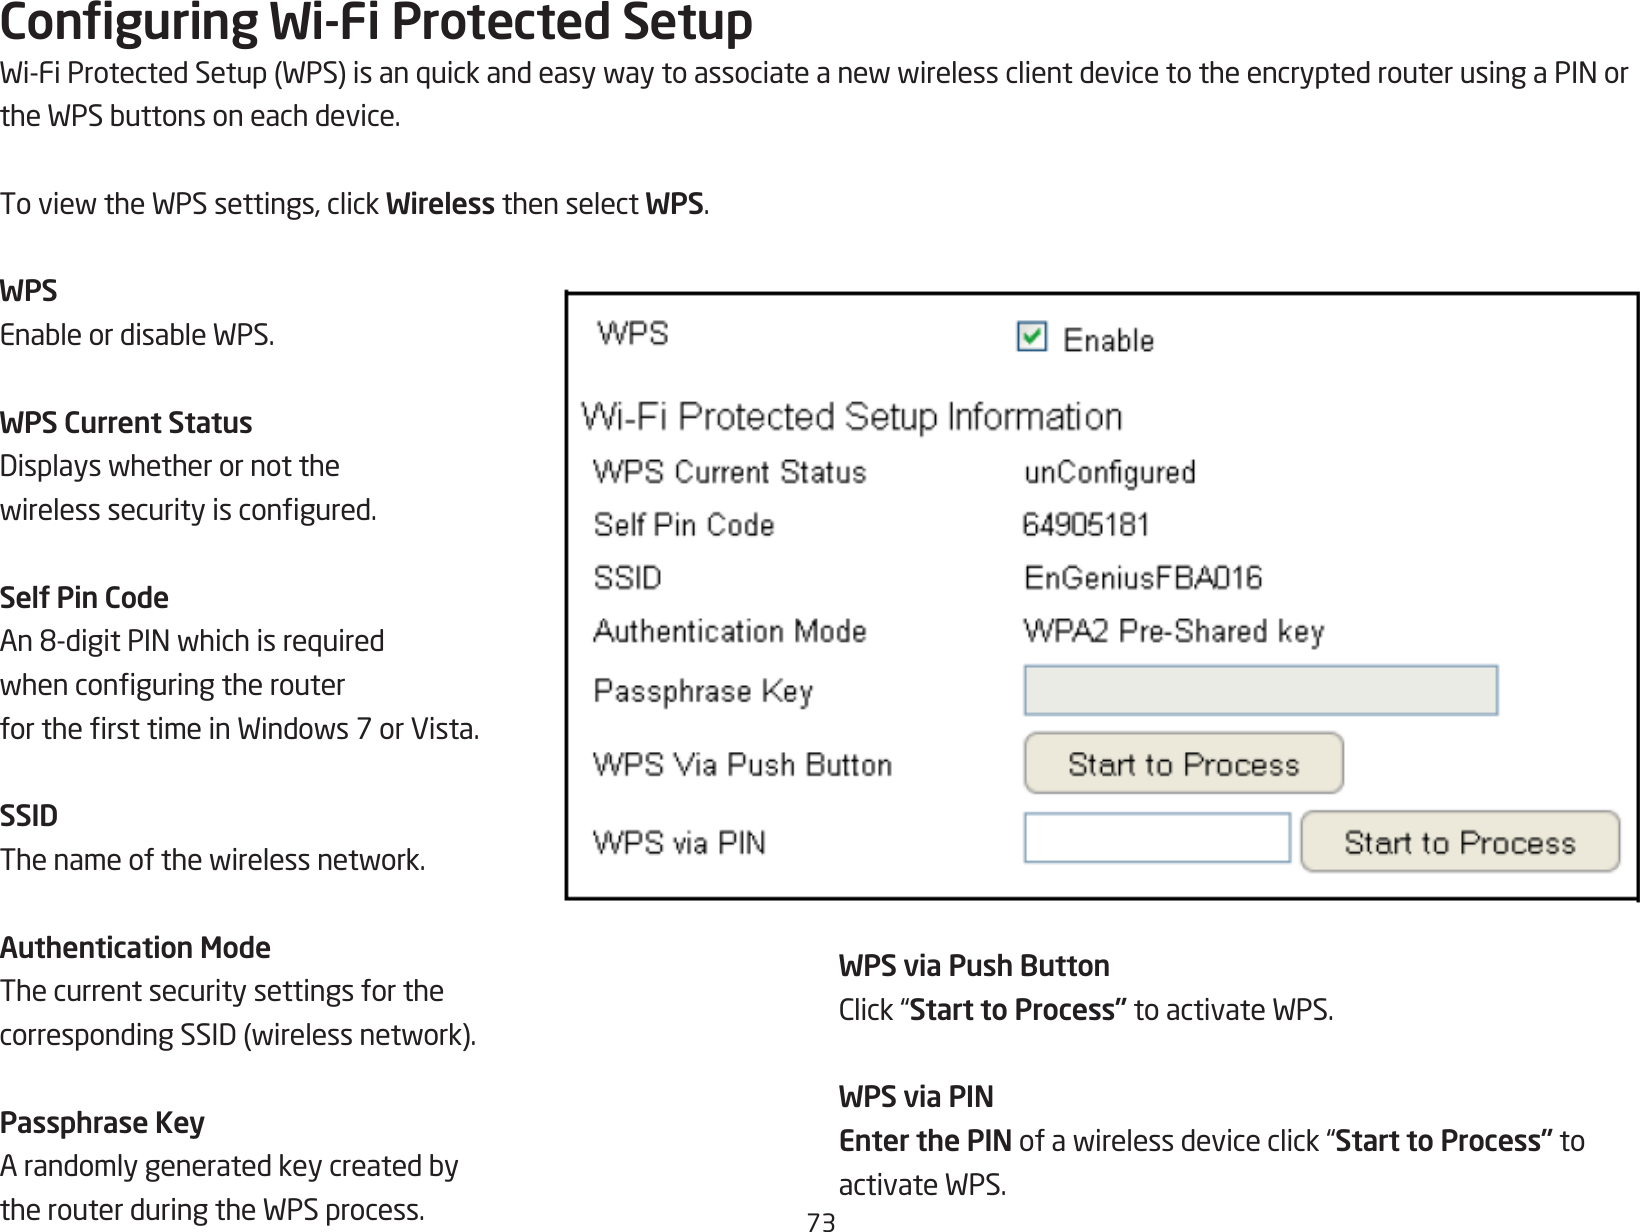 73Conguring Wi-Fi Protected SetupWi-FiProtectedSetup(WPS)isanquickandeasywaytoassociateanewwirelessclientdevicetotheencryptedrouterusingaPINortheWPSbuttonsoneachdevice.ToviewtheWPSsettings,clickWireless then select WPS.WPSEnableordisableWPS.WPS Current StatusDisplayswhetherornotthewirelesssecurityiscongured.Self Pin CodeAn8-digitPINwhichisrequiredwhenconguringtherouterforthersttimeinWindows7orVista.SSIDThenameofthewirelessnetwork.Authentication ModeThe current security settings for the correspondingSSID(wirelessnetwork).Passphrase KeyArandomlygeneratedkeycreatedbytherouterduringtheWPSprocess.WPS via Push ButtonClick“Start to Process”toactivateWPS.WPS via PINEnter the PINofawirelessdeviceclick“Start to Process” to activateWPS.